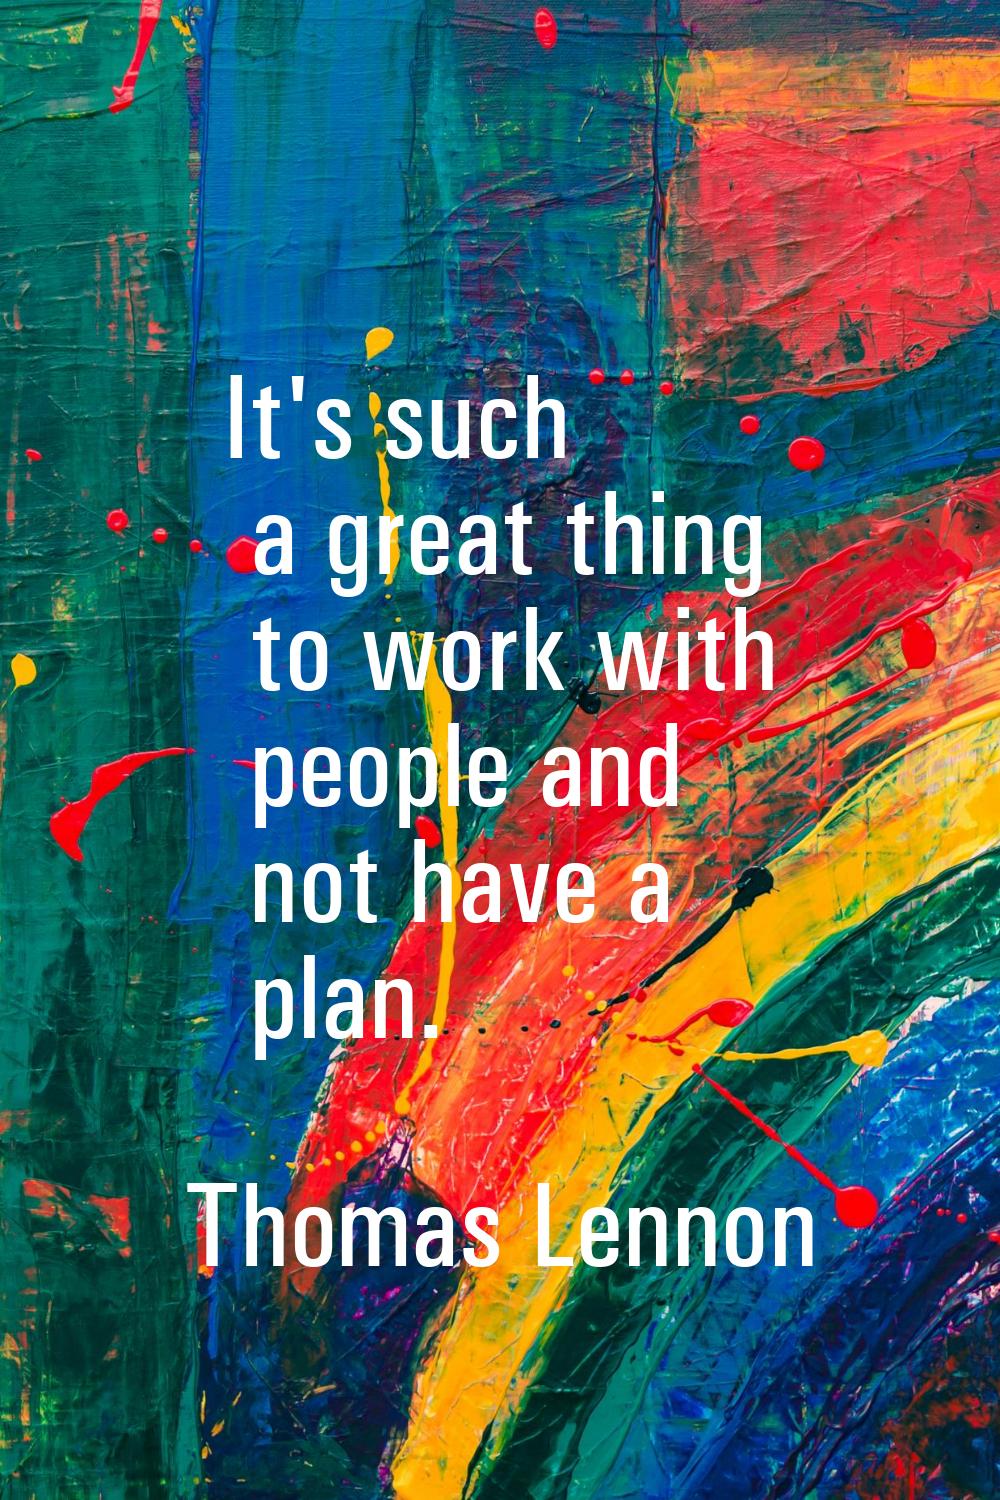 It's such a great thing to work with people and not have a plan.